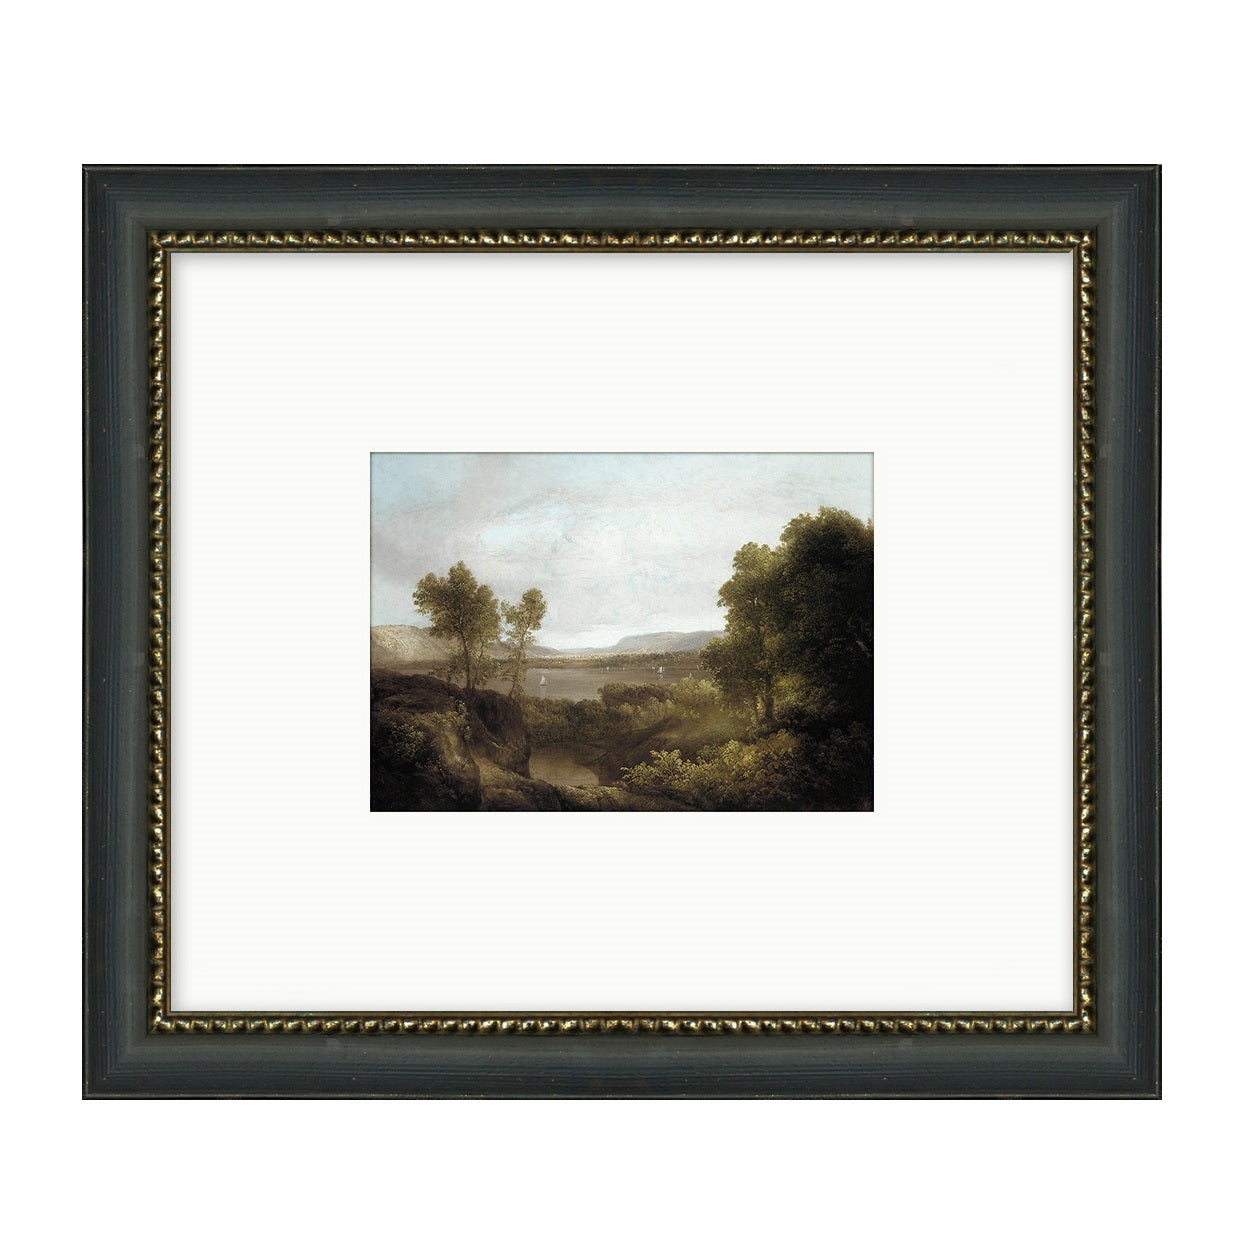 Framed art called Tranquil Summer shows green landscape on a quiet summer day